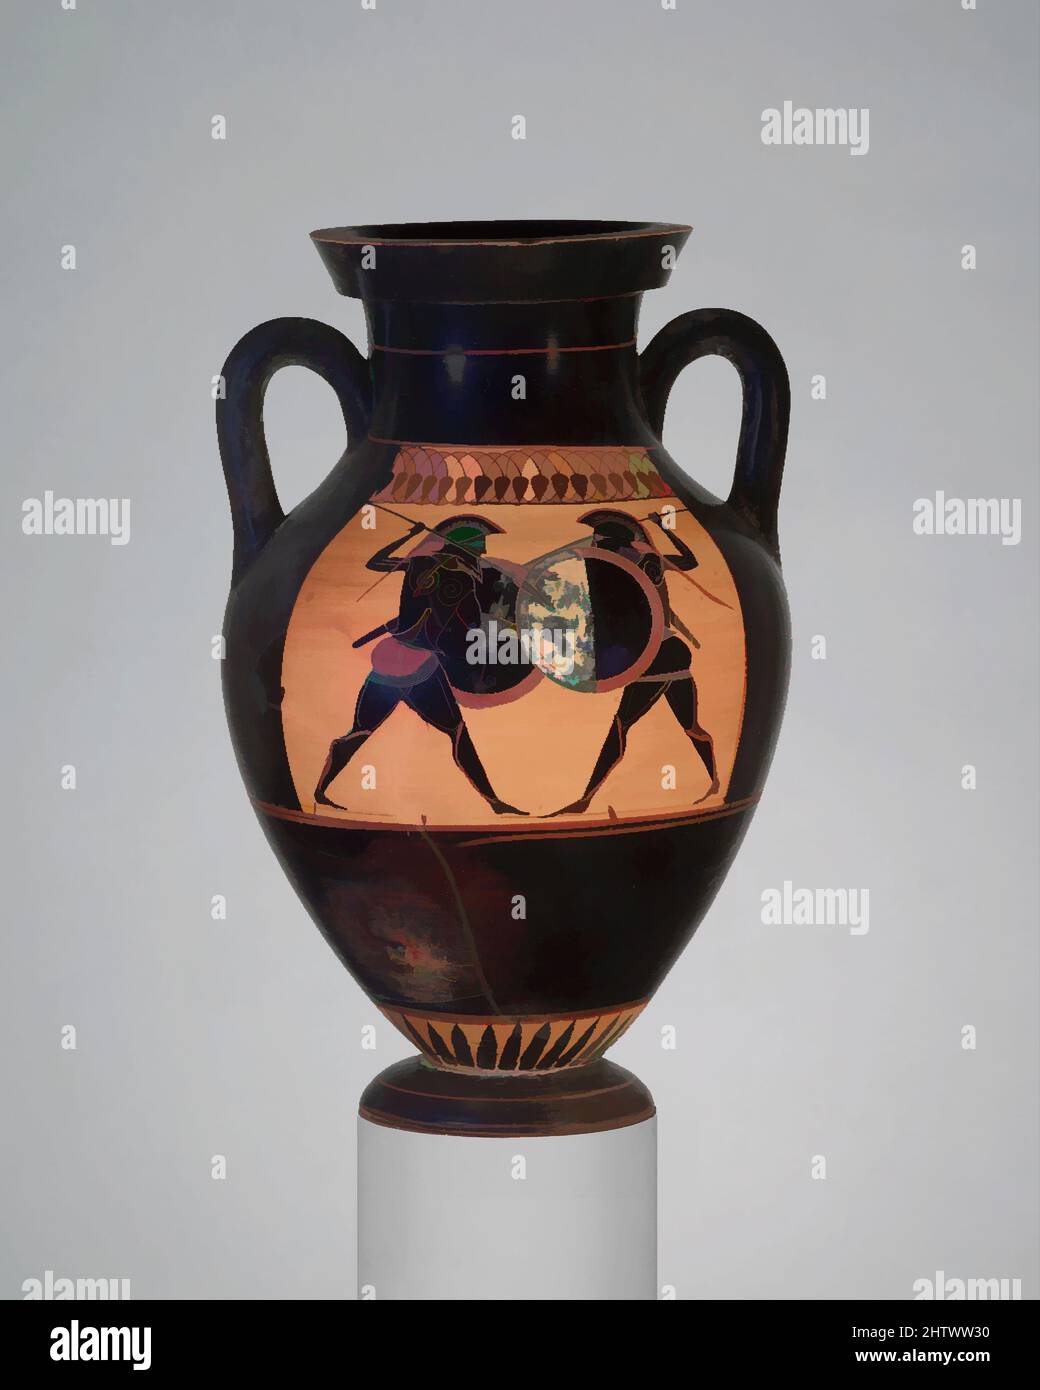 Art inspired by Terracotta amphora (jar), Archaic, ca. 530 B.C., Greek, Attic, Terracotta; black-figure, H. 16 5/16 in. (41.5 cm), Vases, Obverse, combat between two warriors, Reverse, Dionysos, the god of wine, between two satyrs. The Lysippides Painter was a follower of Exekias who, Classic works modernized by Artotop with a splash of modernity. Shapes, color and value, eye-catching visual impact on art. Emotions through freedom of artworks in a contemporary way. A timeless message pursuing a wildly creative new direction. Artists turning to the digital medium and creating the Artotop NFT Stock Photo